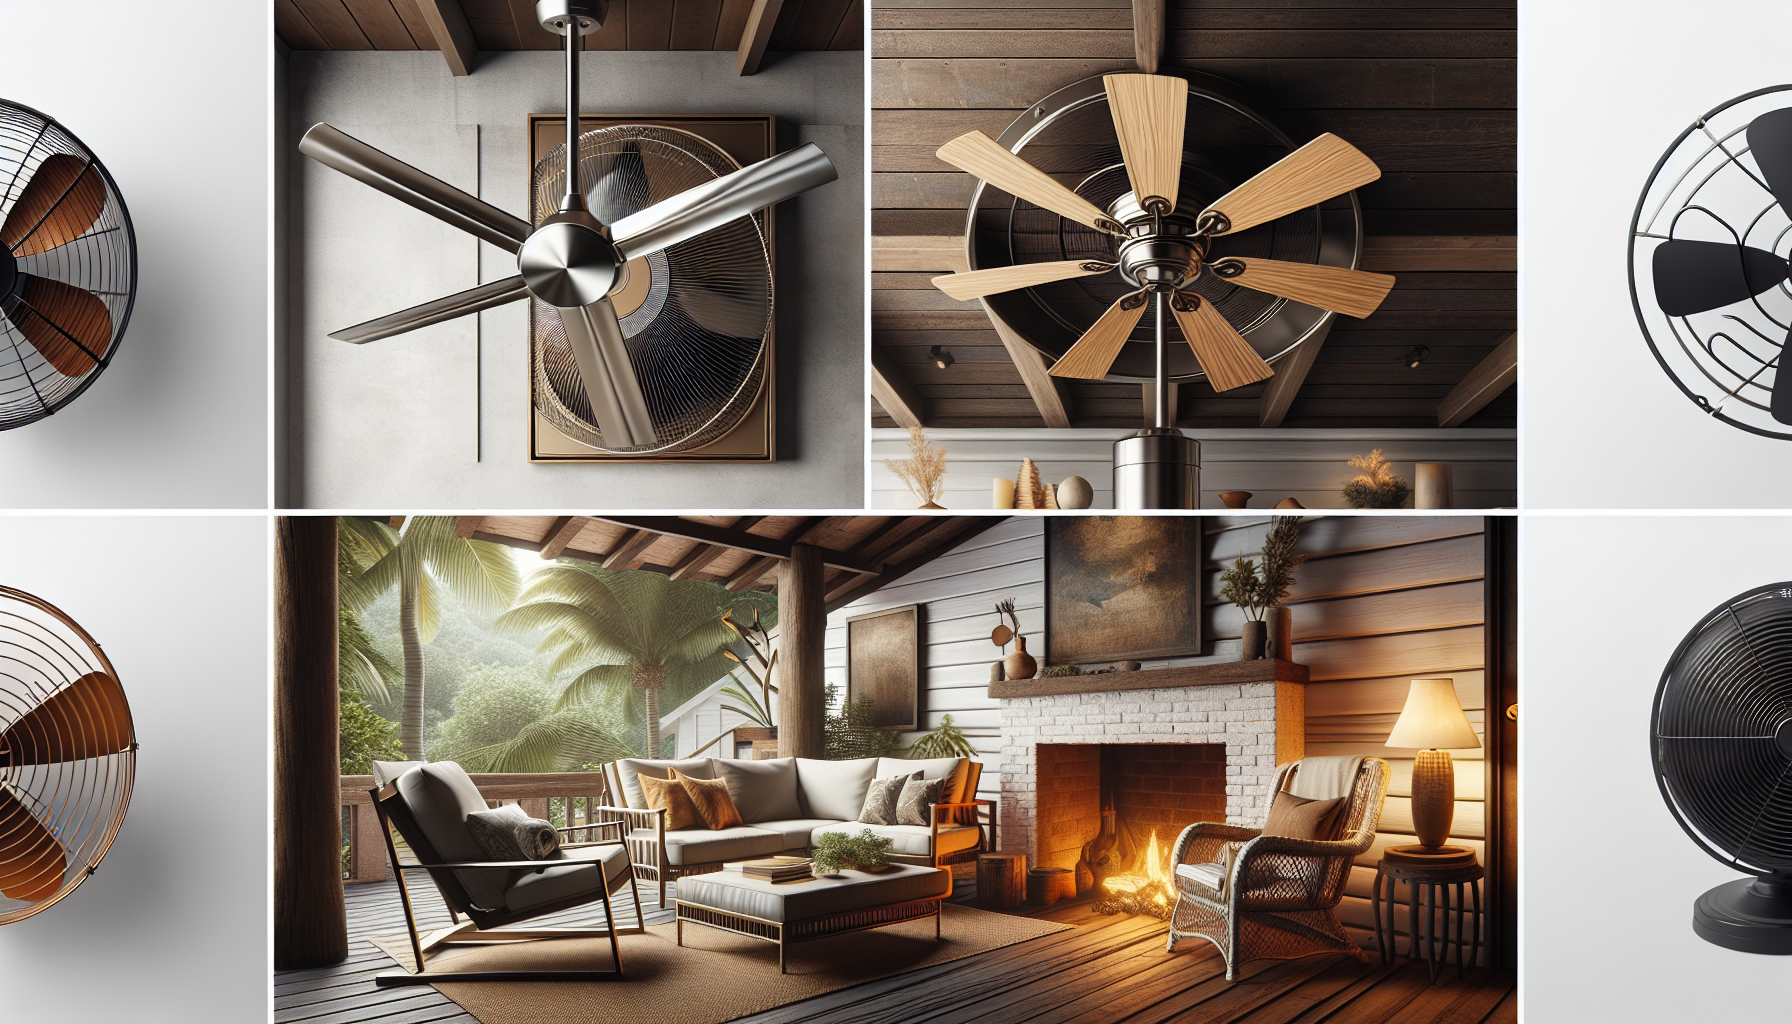 Assortment of outdoor fan styles including modern, traditional, and rustic designs